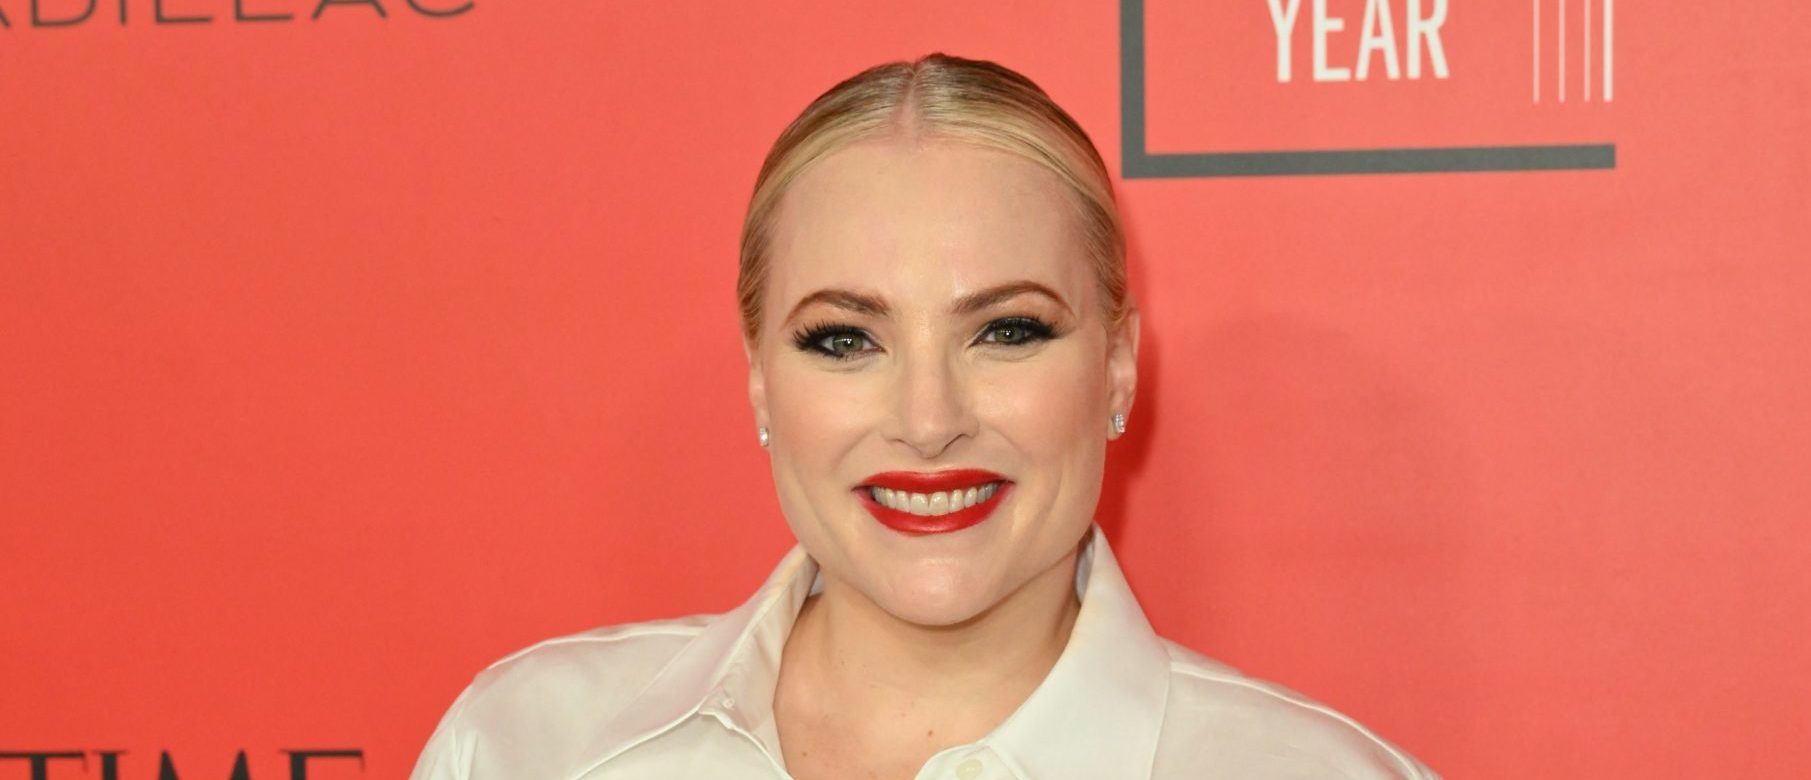 Meghan McCain arrives for the Time 100 Gala (Photo by ANGELA WEISS/AFP via Getty Images)